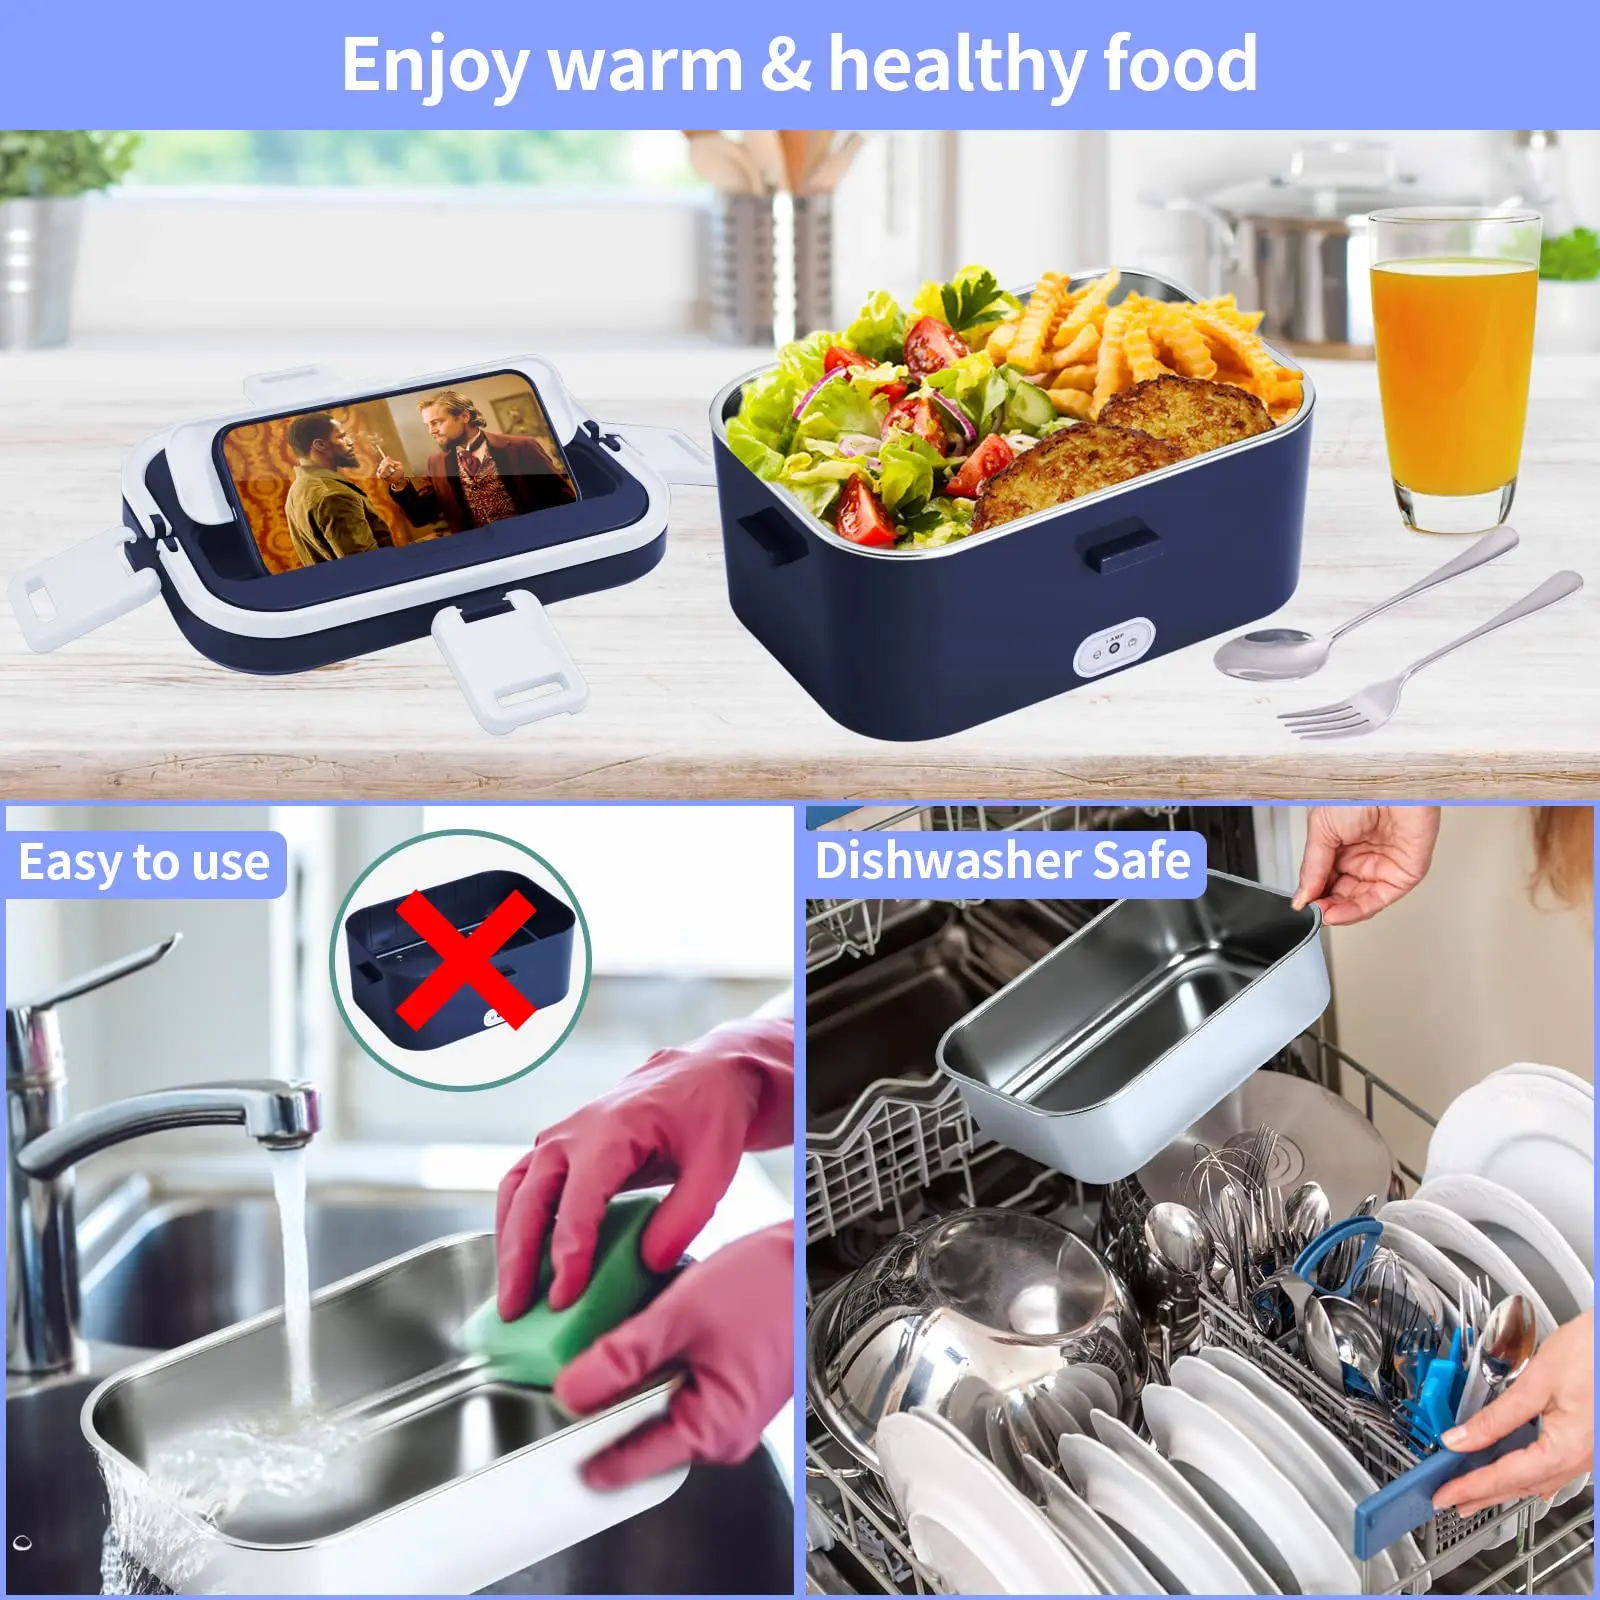 VECH Electric Heating Lunch Box Food Heater Portable Lunch Containers Warming Bento Box for Home & Office Use 110V Heat Up Lunch Box (Blue)